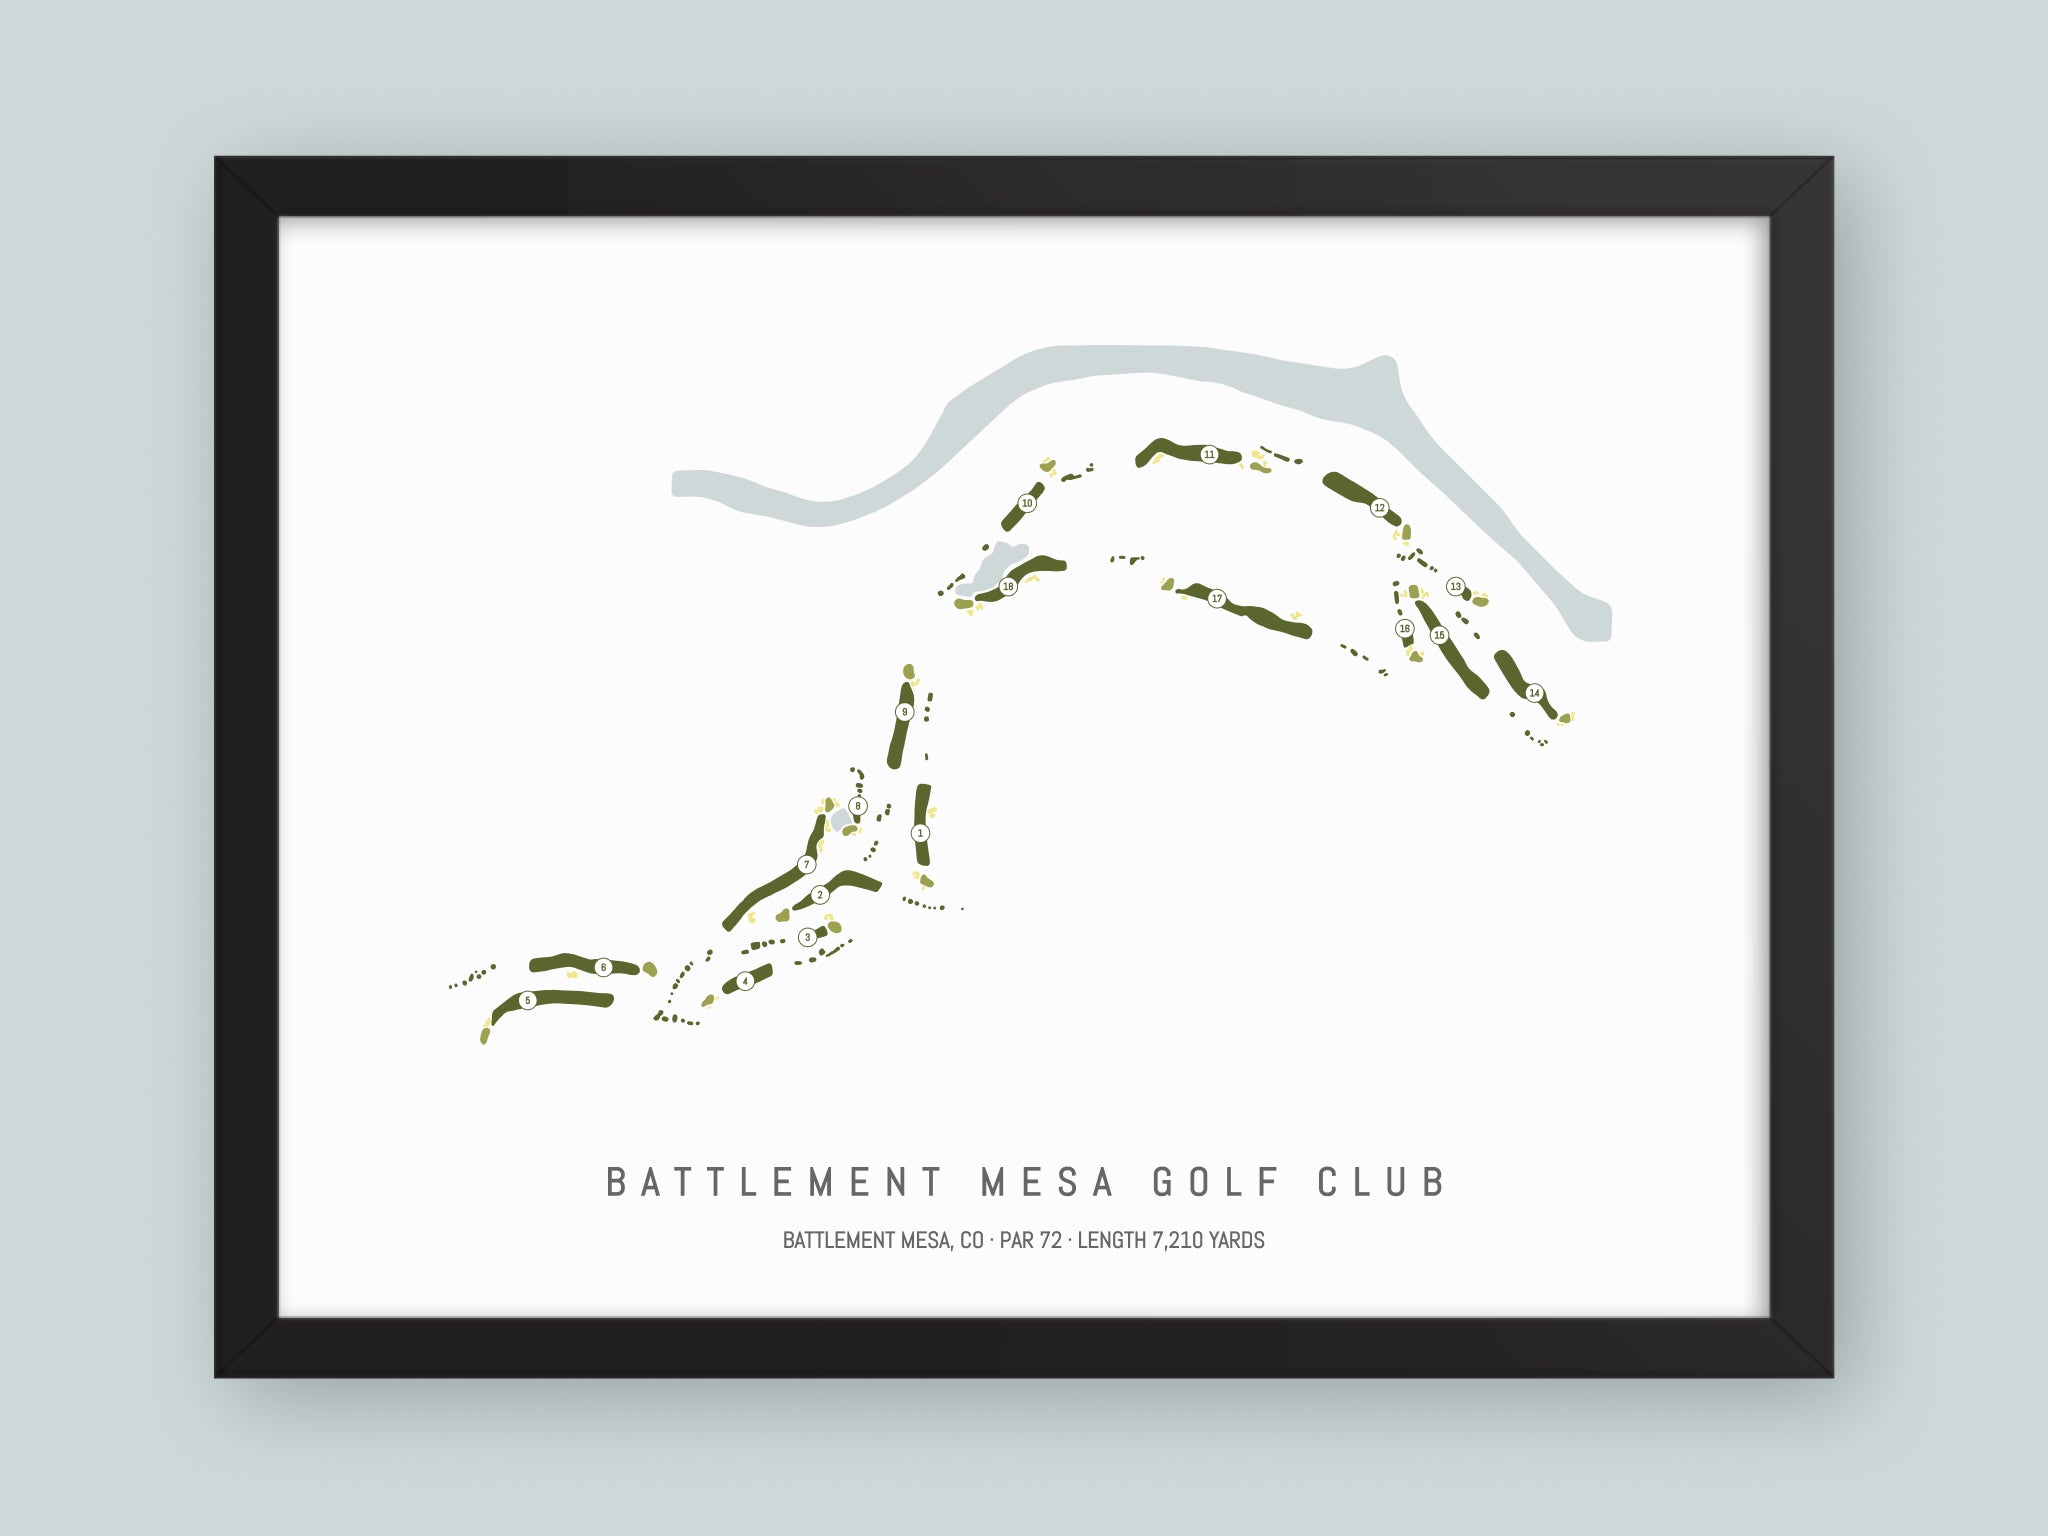 Battlement-Mesa-Golf-Club-CO--Black-Frame-24x18-With-Hole-Numbers